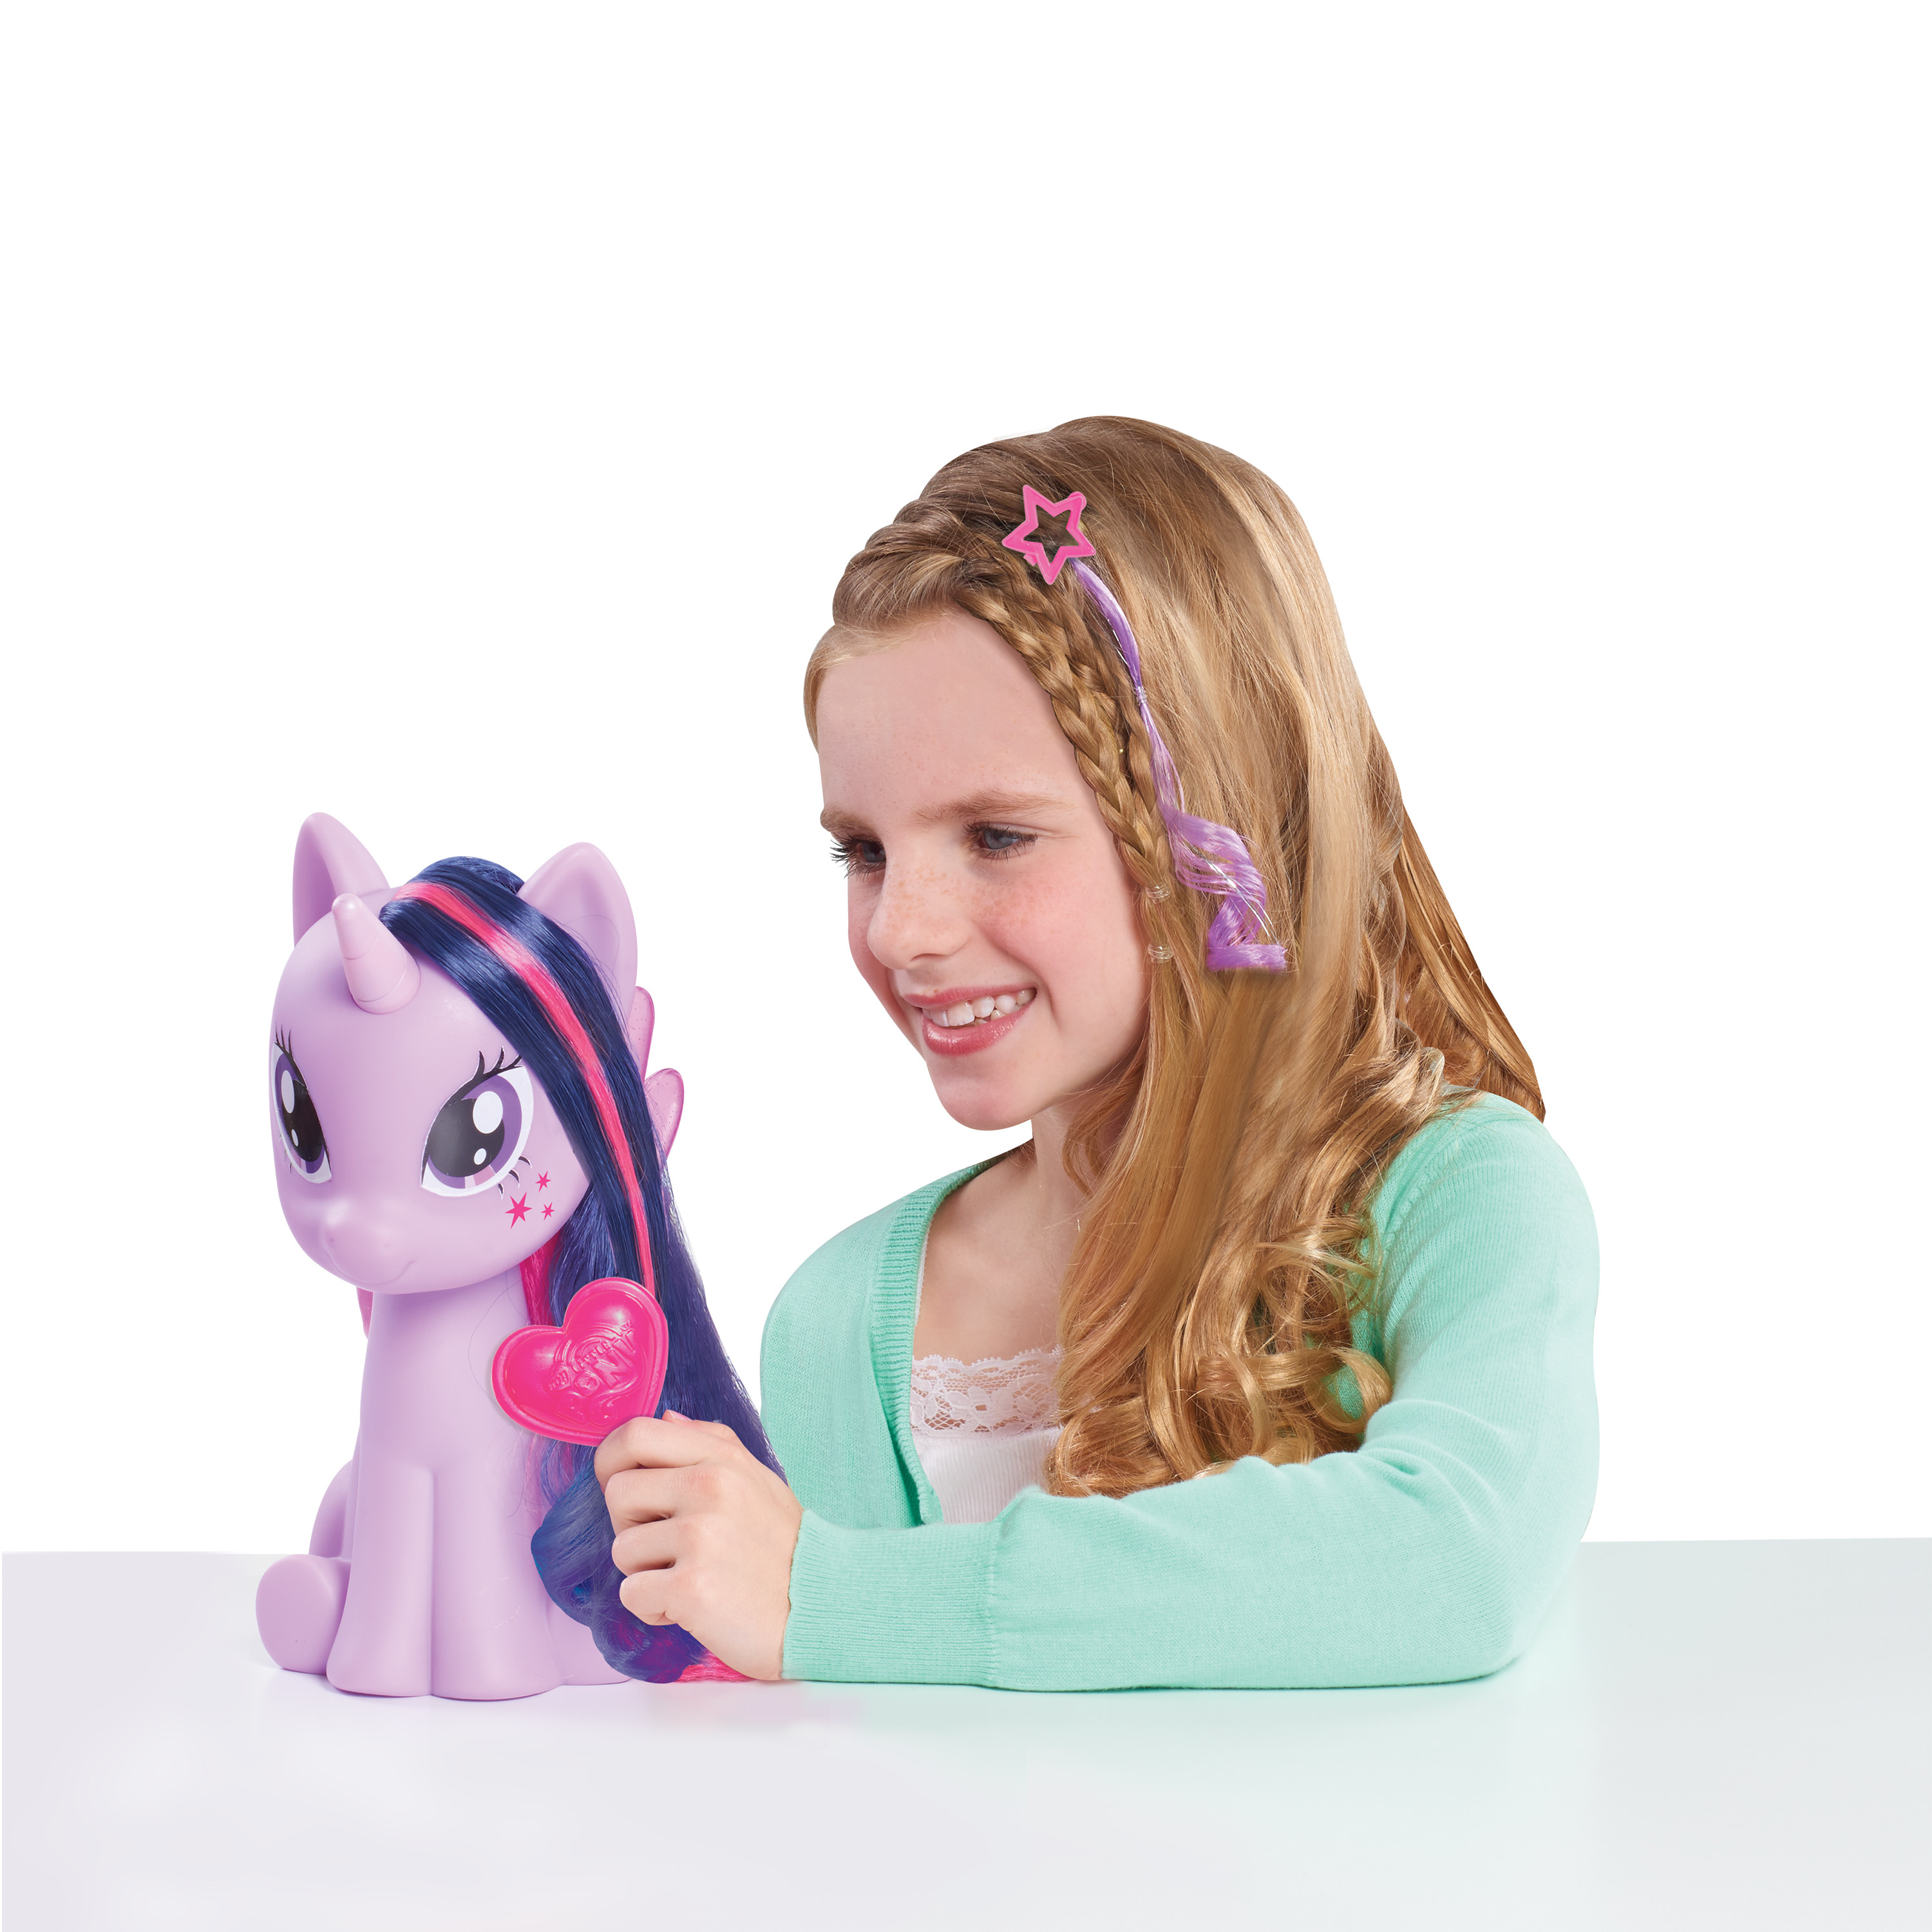 My Little Pony Twilight Sparkle Styling Head with Color Change, 12 Pieces, Purple Unicorn, Pretend Play Toys for Girls,  Kids Toys for Ages 3 Up, Gifts and Presents - image 2 of 3